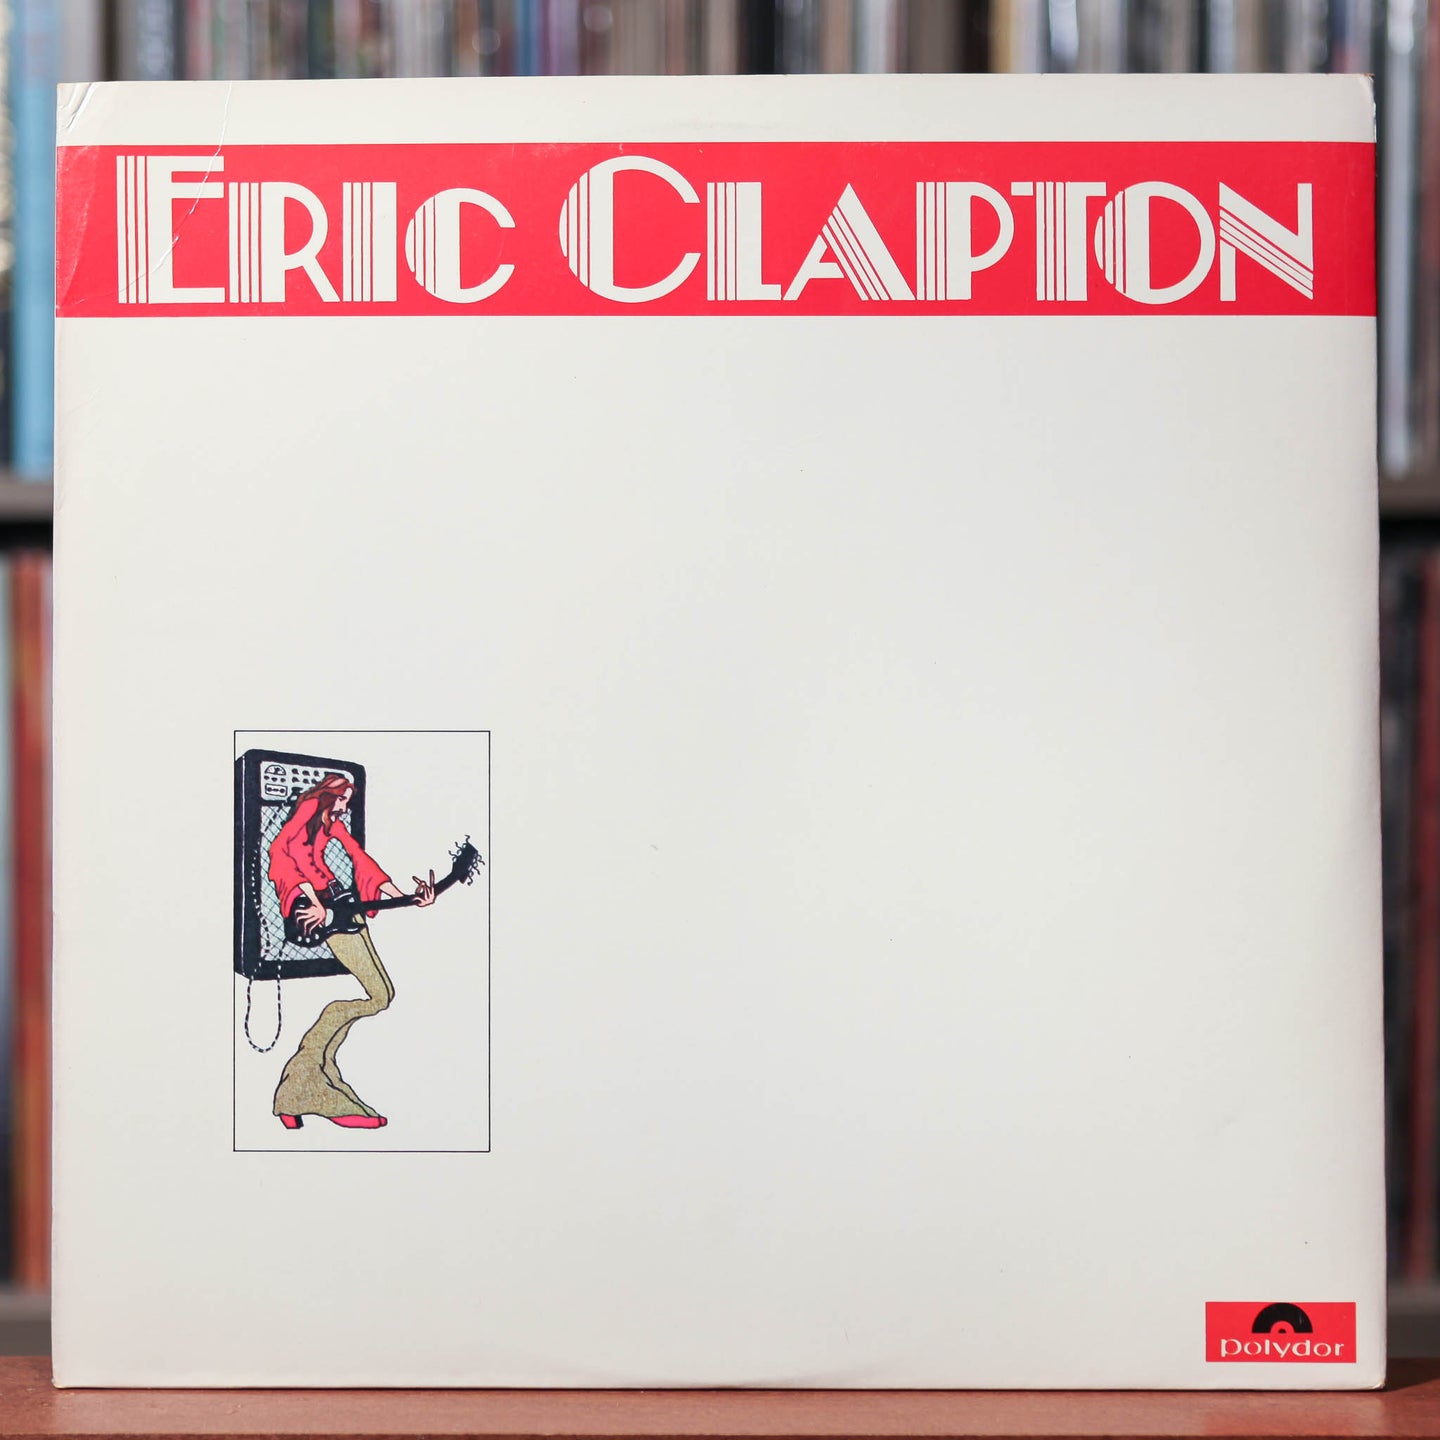 Eric Clapton - At His Best - 2LP - 1975 Polydor, VG+/VG+